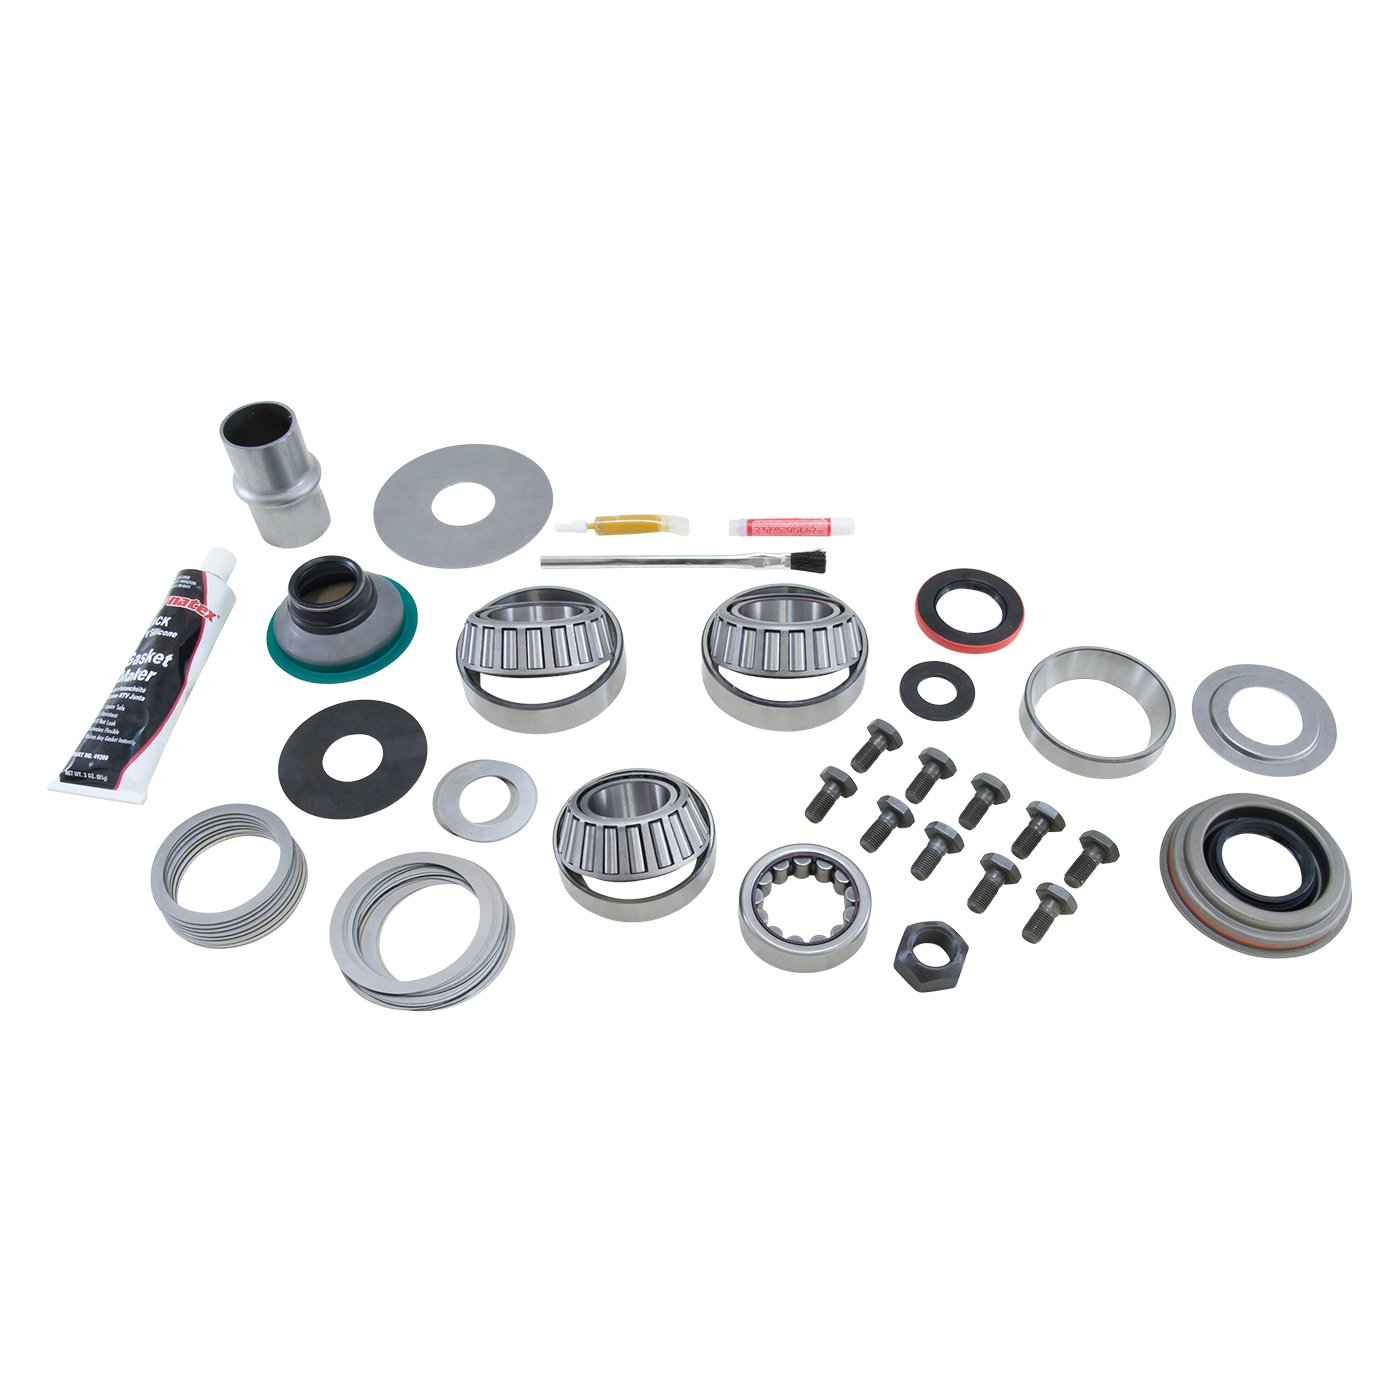 USA Standard ZK D44-DIS Master Overhaul Kit, For The Dana 44 Disconnect Front